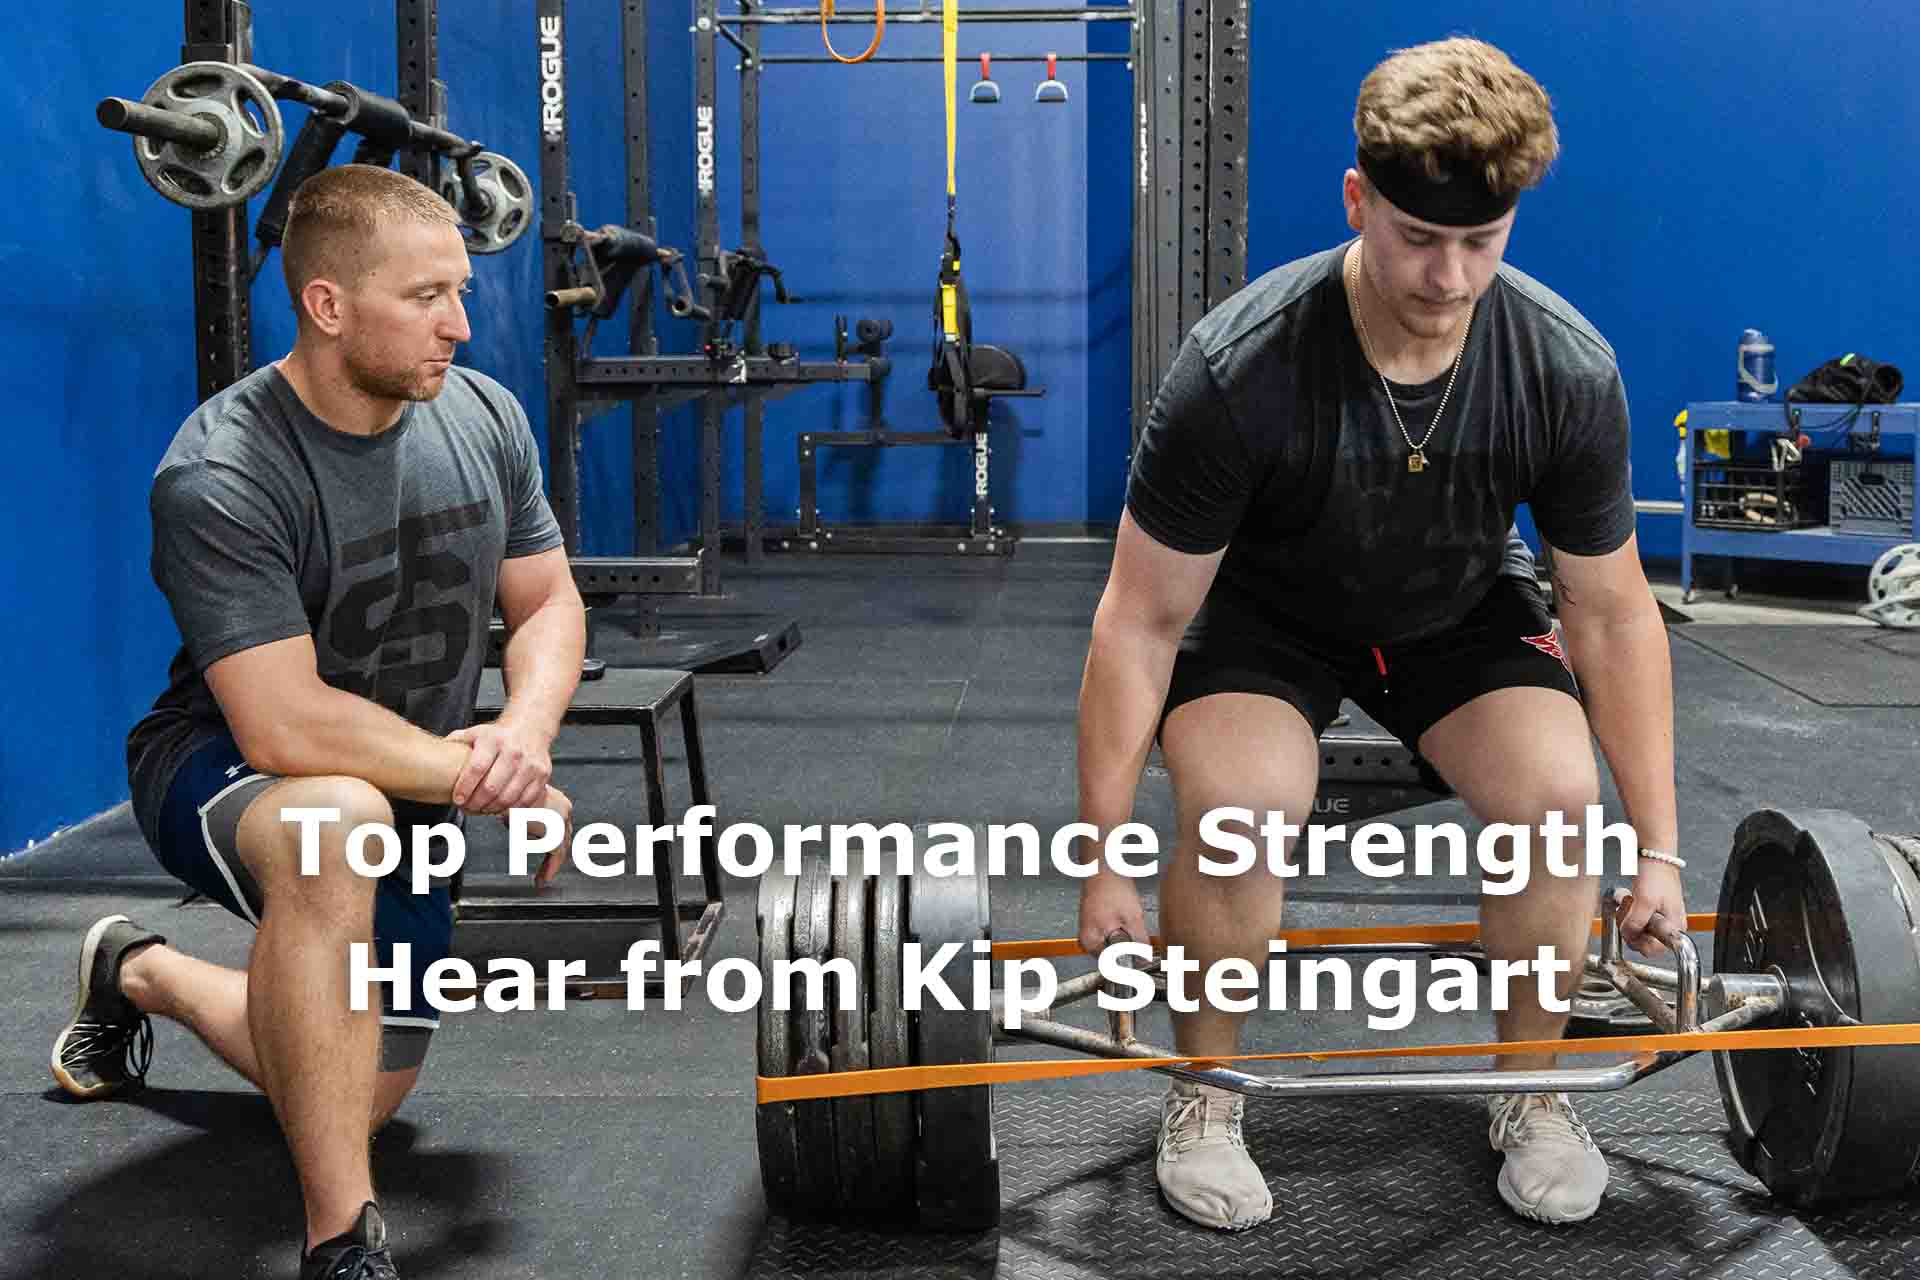 Strength Training for Athletes - Top Performance Strength